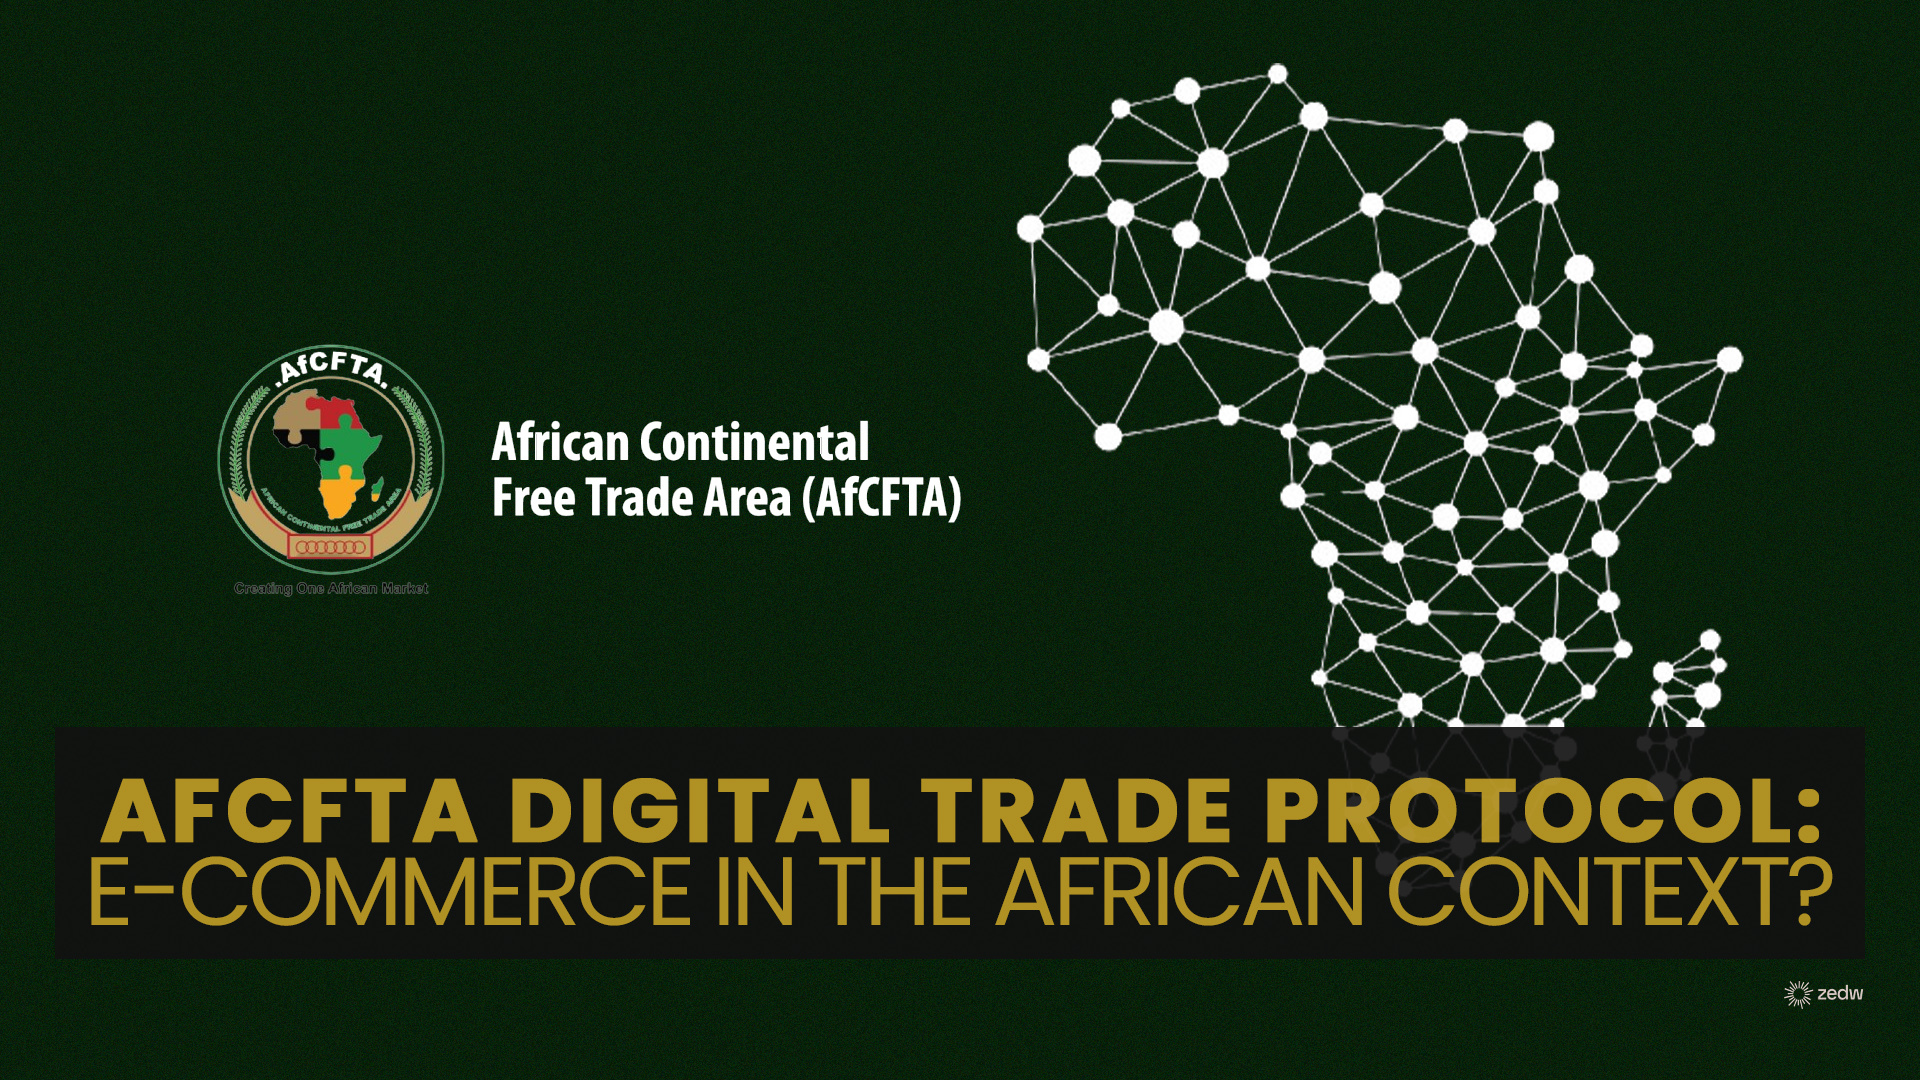 AfCFTA Digital Trade Protocol: Will it address e-commerce in the African context?